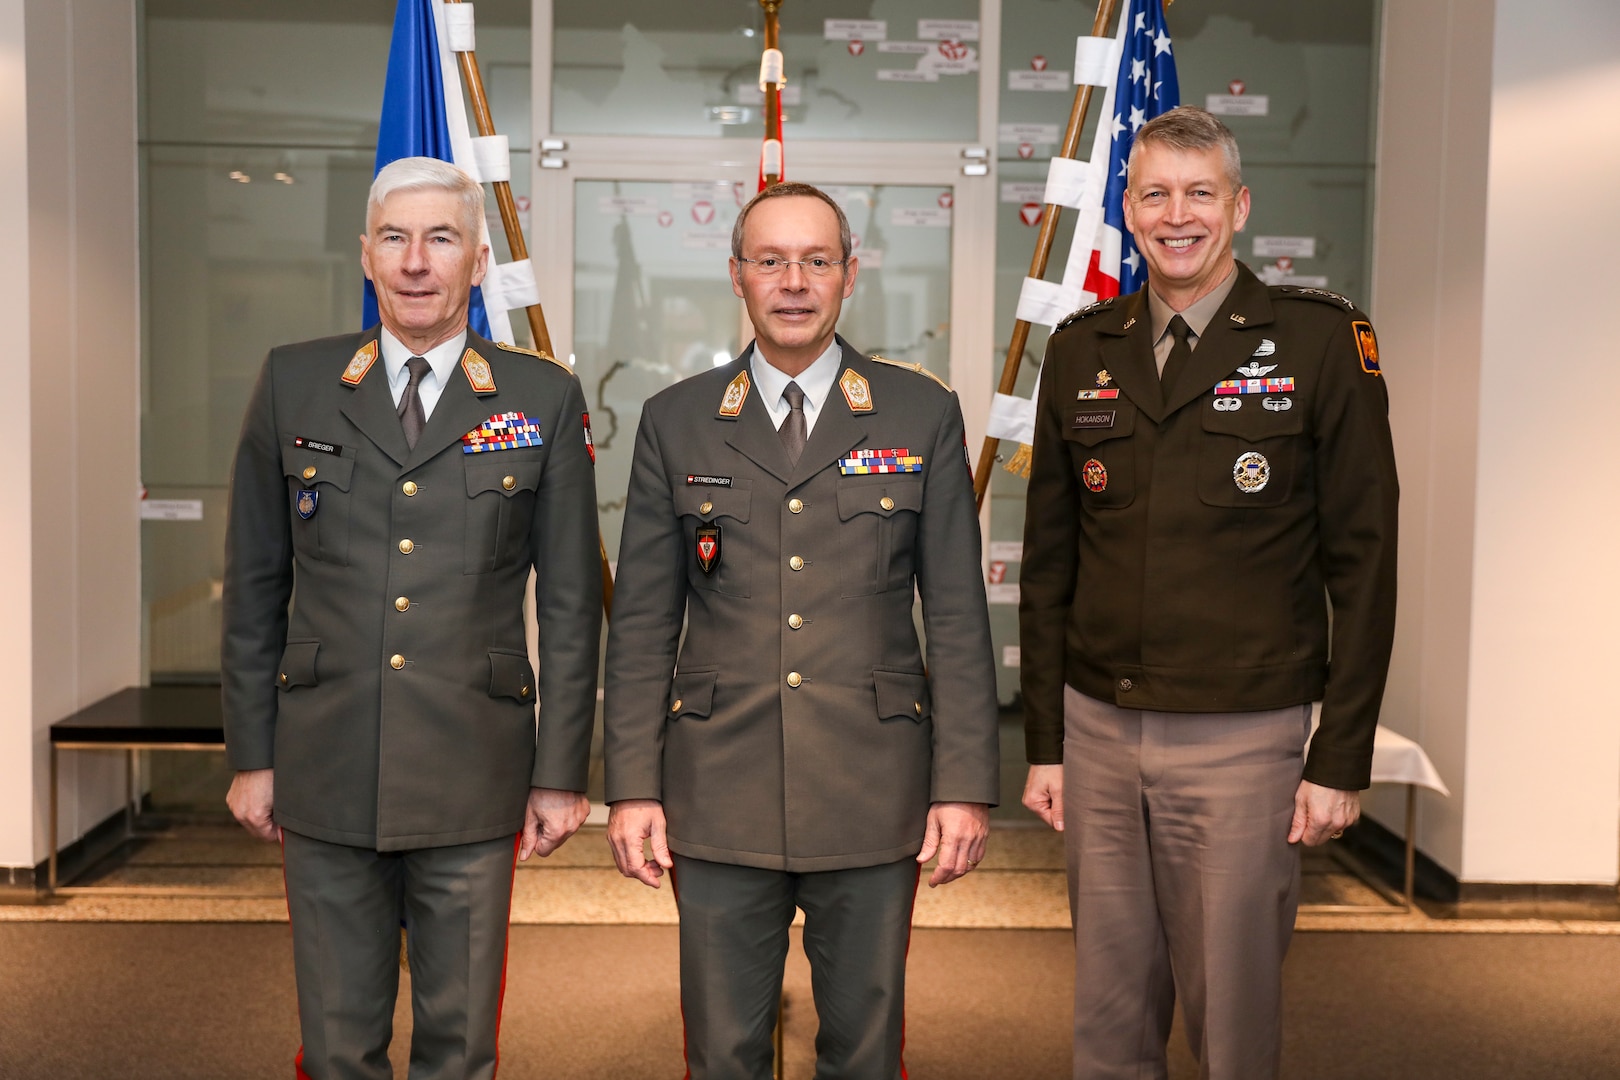 From left, Gen. Robert Brieger, chairman, European Union Military Committee; Gen. Rudolf Striedinger, Austria’s chief of defense, and Army Gen. Daniel Hokanson, chief, National Guard Bureau, at the Federal Ministry of Defence of Austria in Vienna Jan. 19, 2024. Austria and the Vermont National Guard are paired in the 100-nation Defense Department National Guard State Partnership Program.